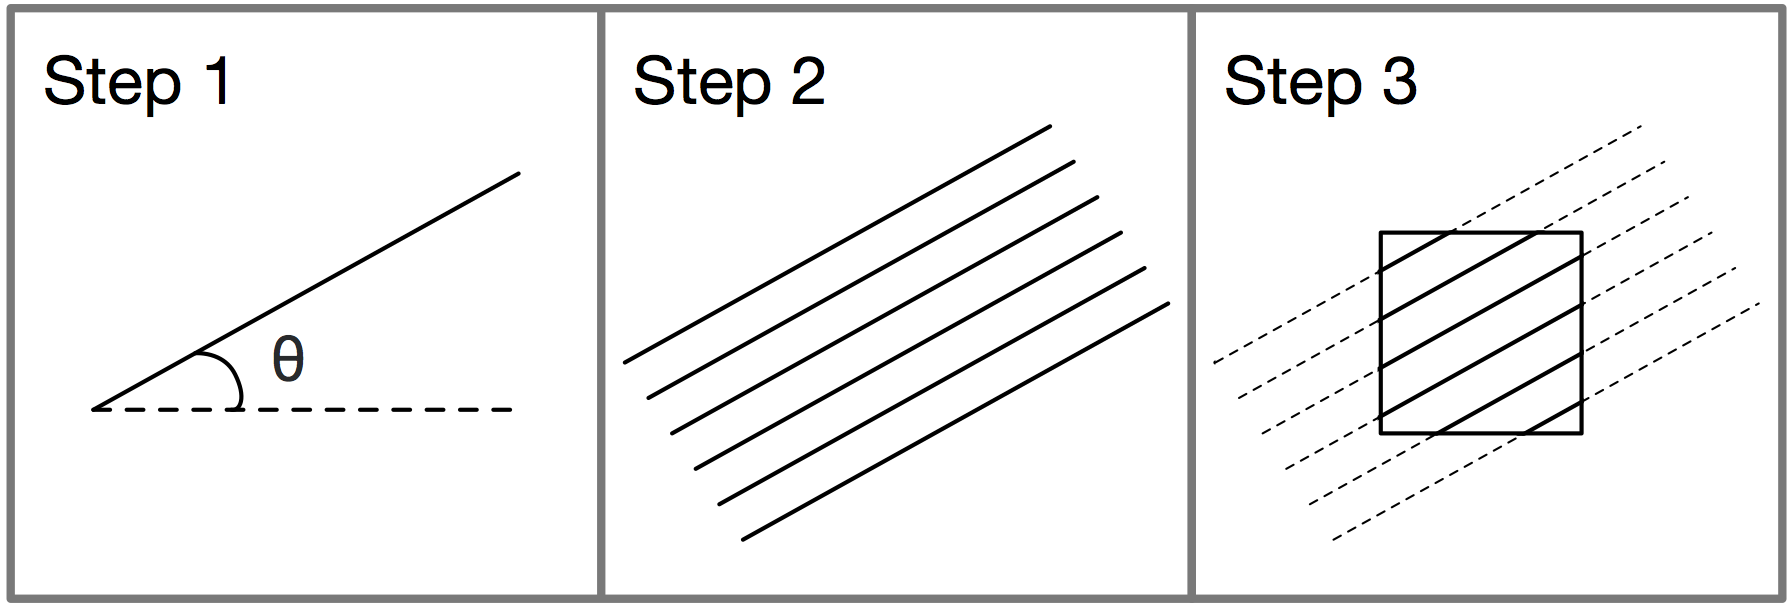 Three step technique describing generation of a single tile shown in the prior examples